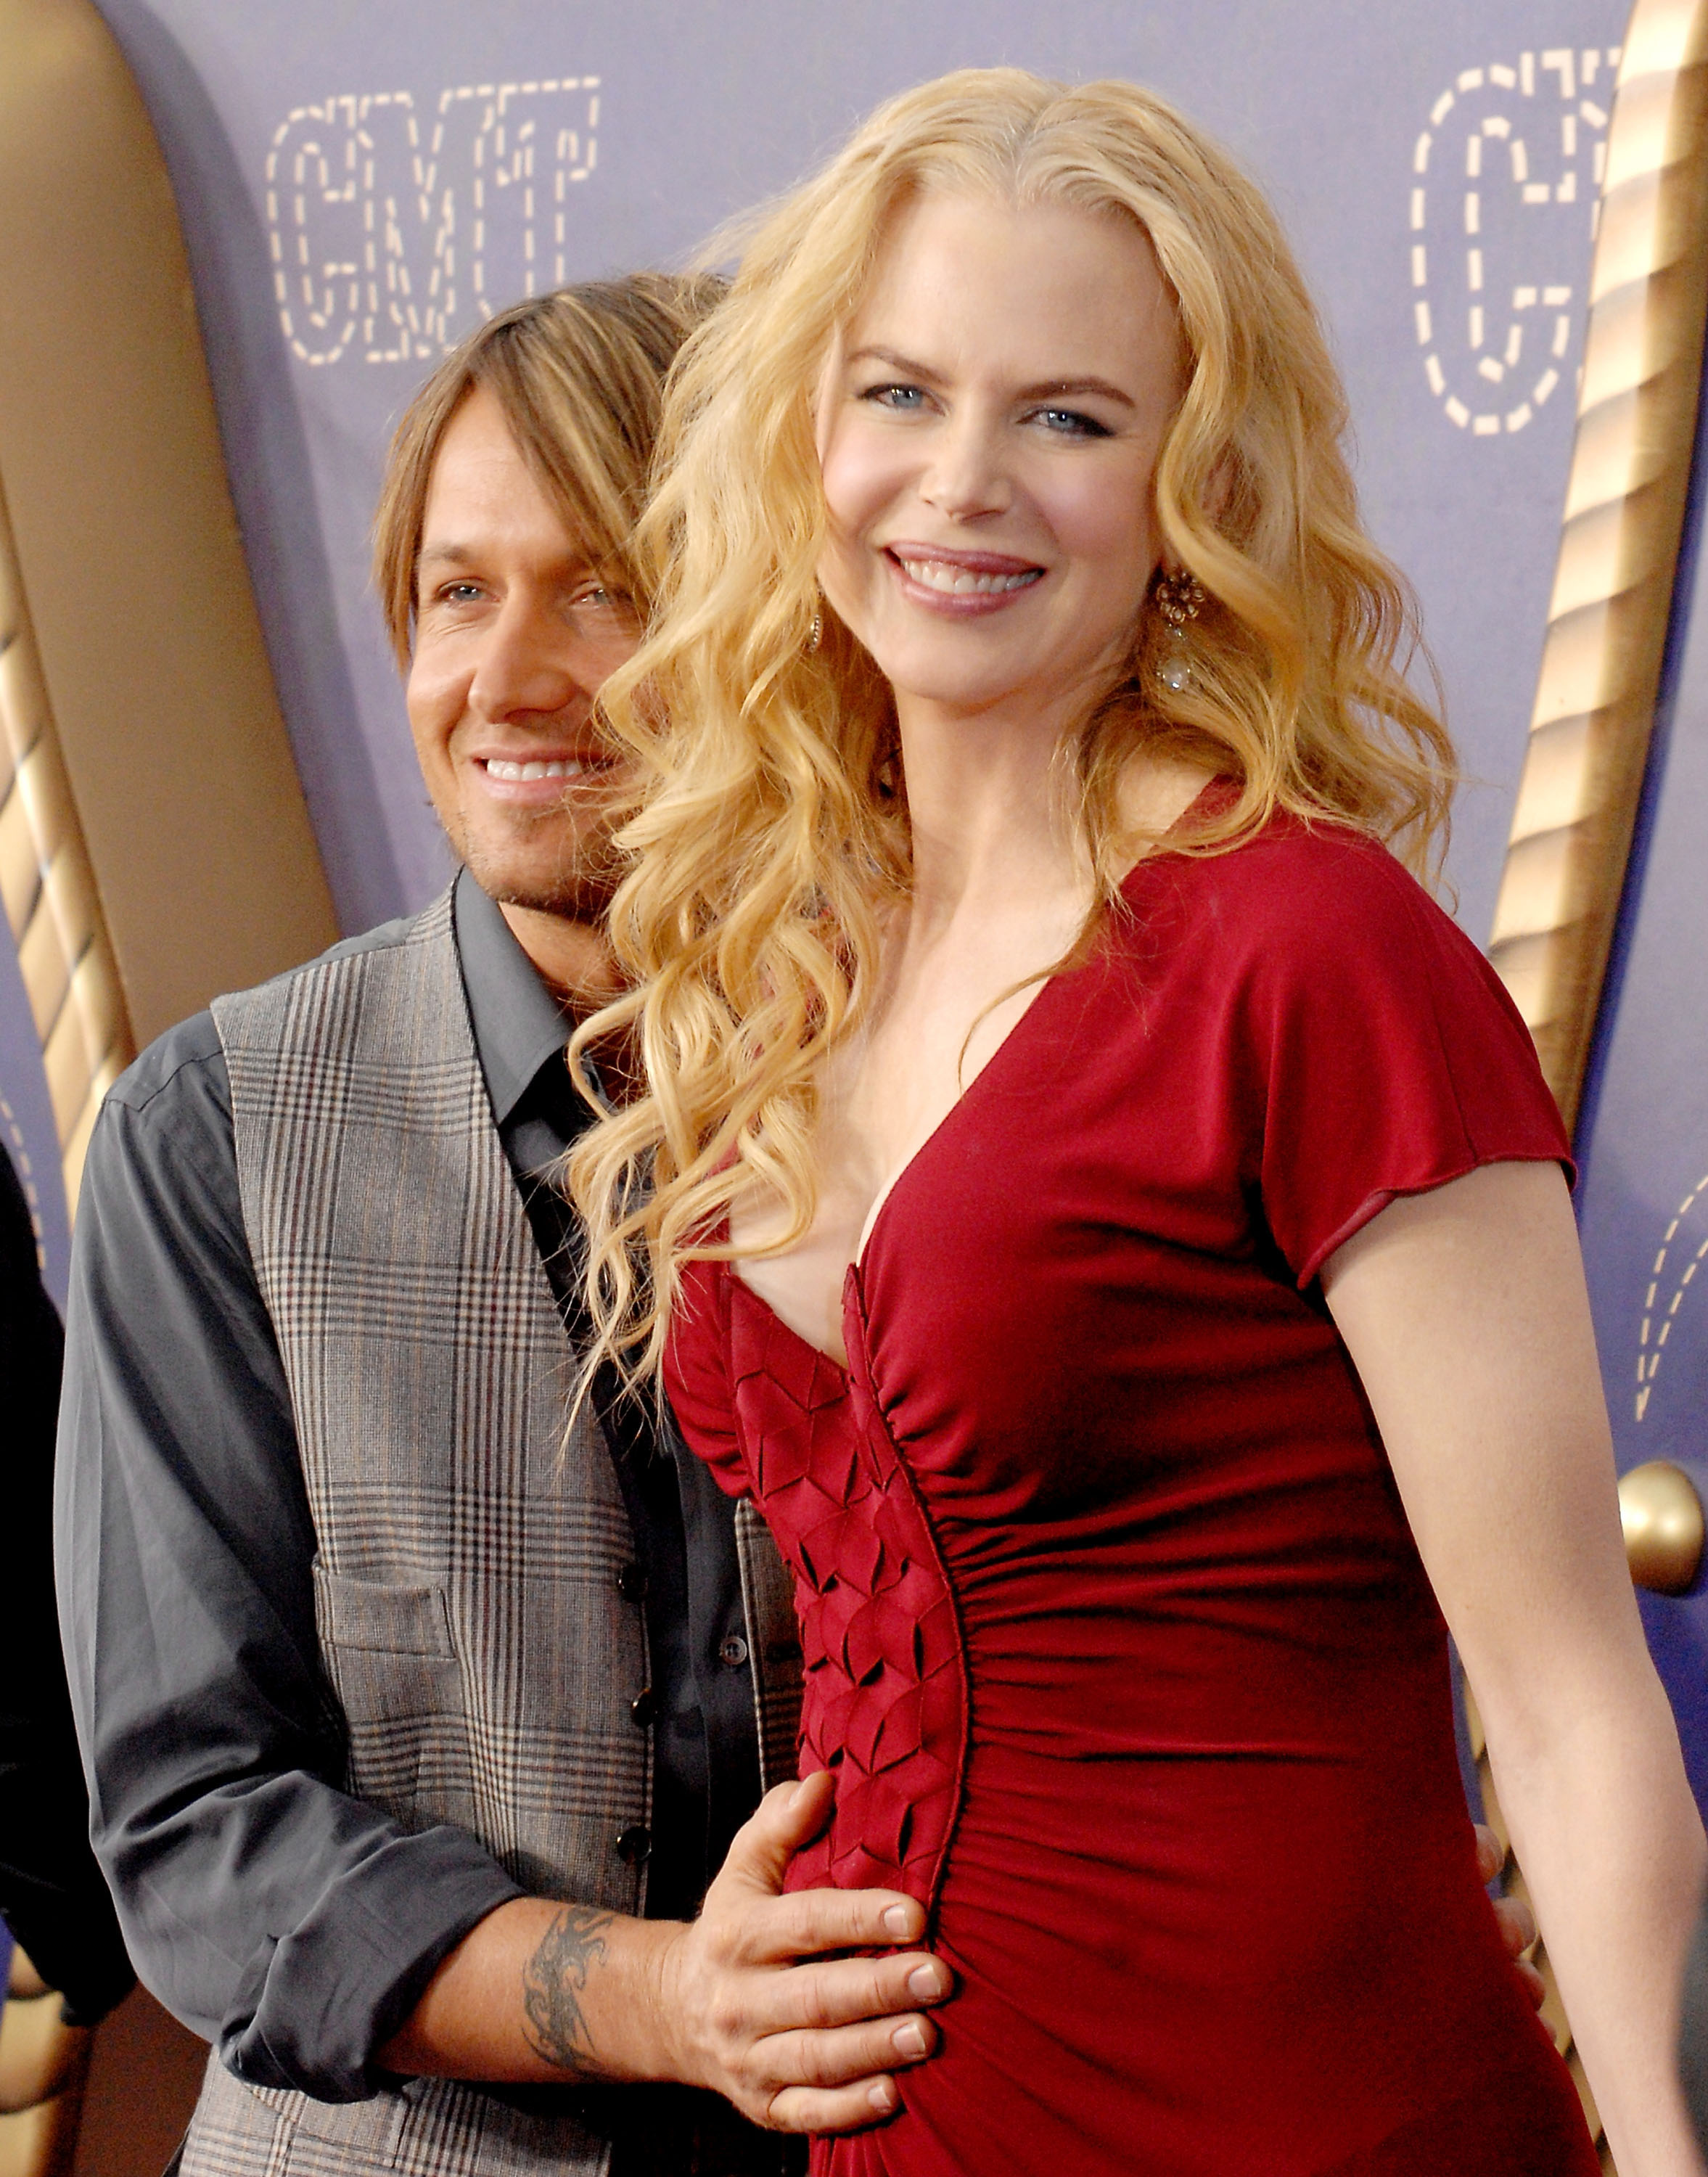 Keith Urban and Nicole Kidman at the Curb Events Center at Belmont University on April 14, 2008, in Nashville, Tennessee. | Source: Getty Images